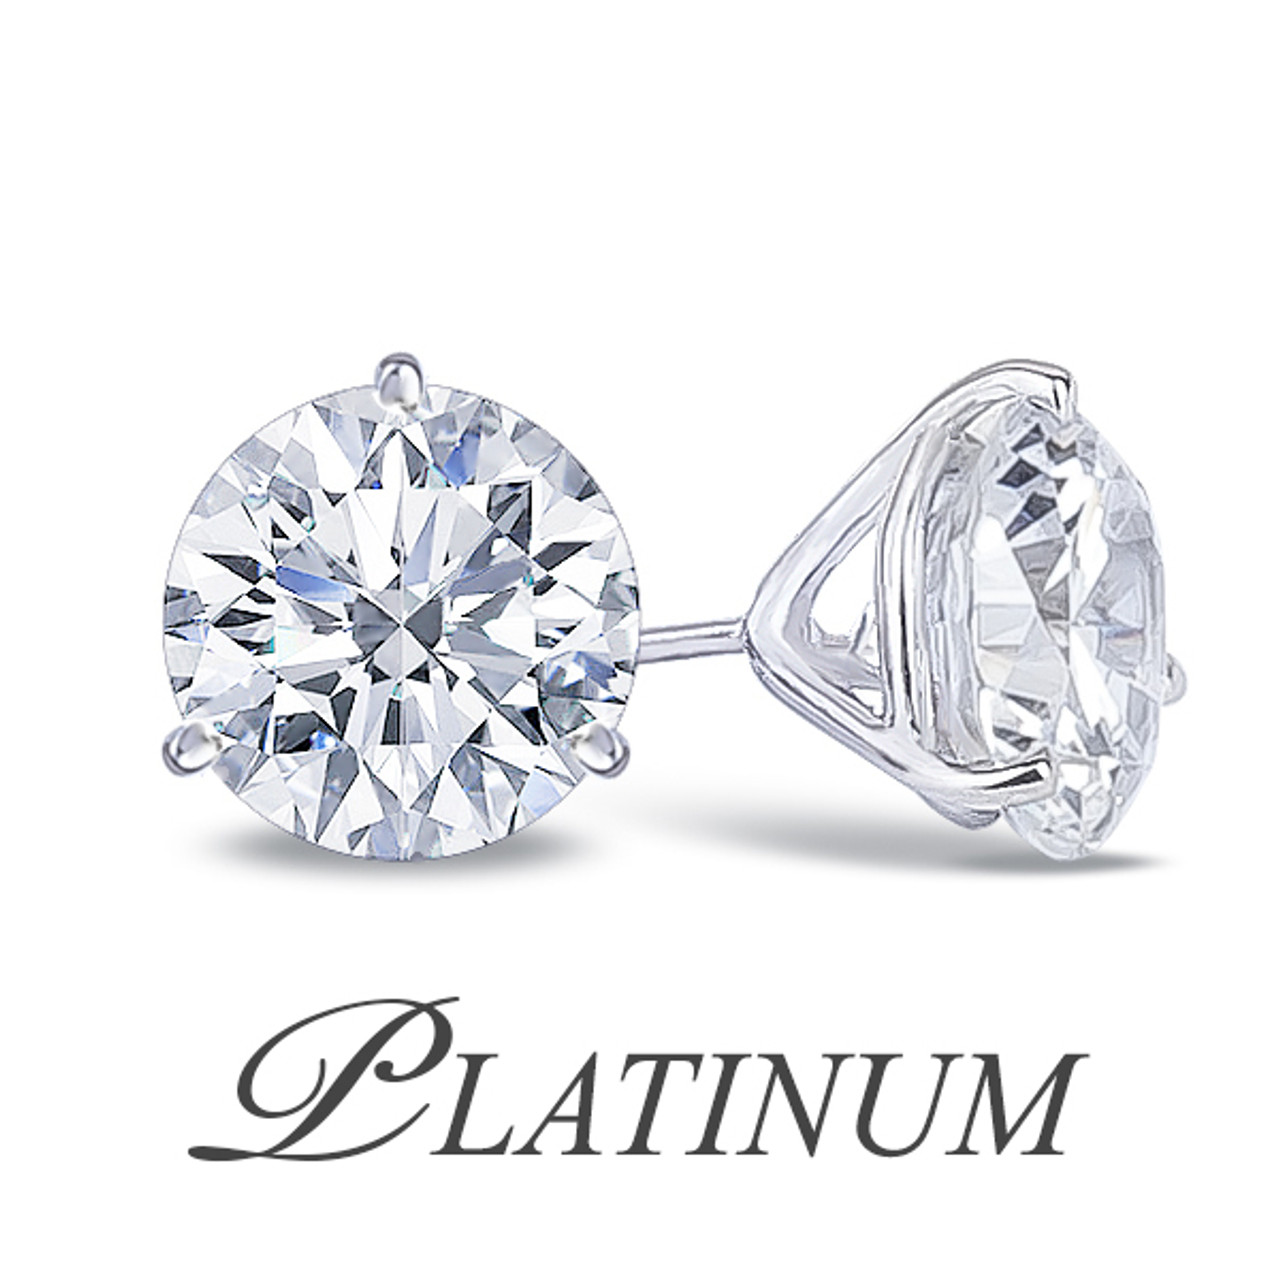 10 Best Cubic Zirconia Earrings For Women Right Now | Classy Women  Collection